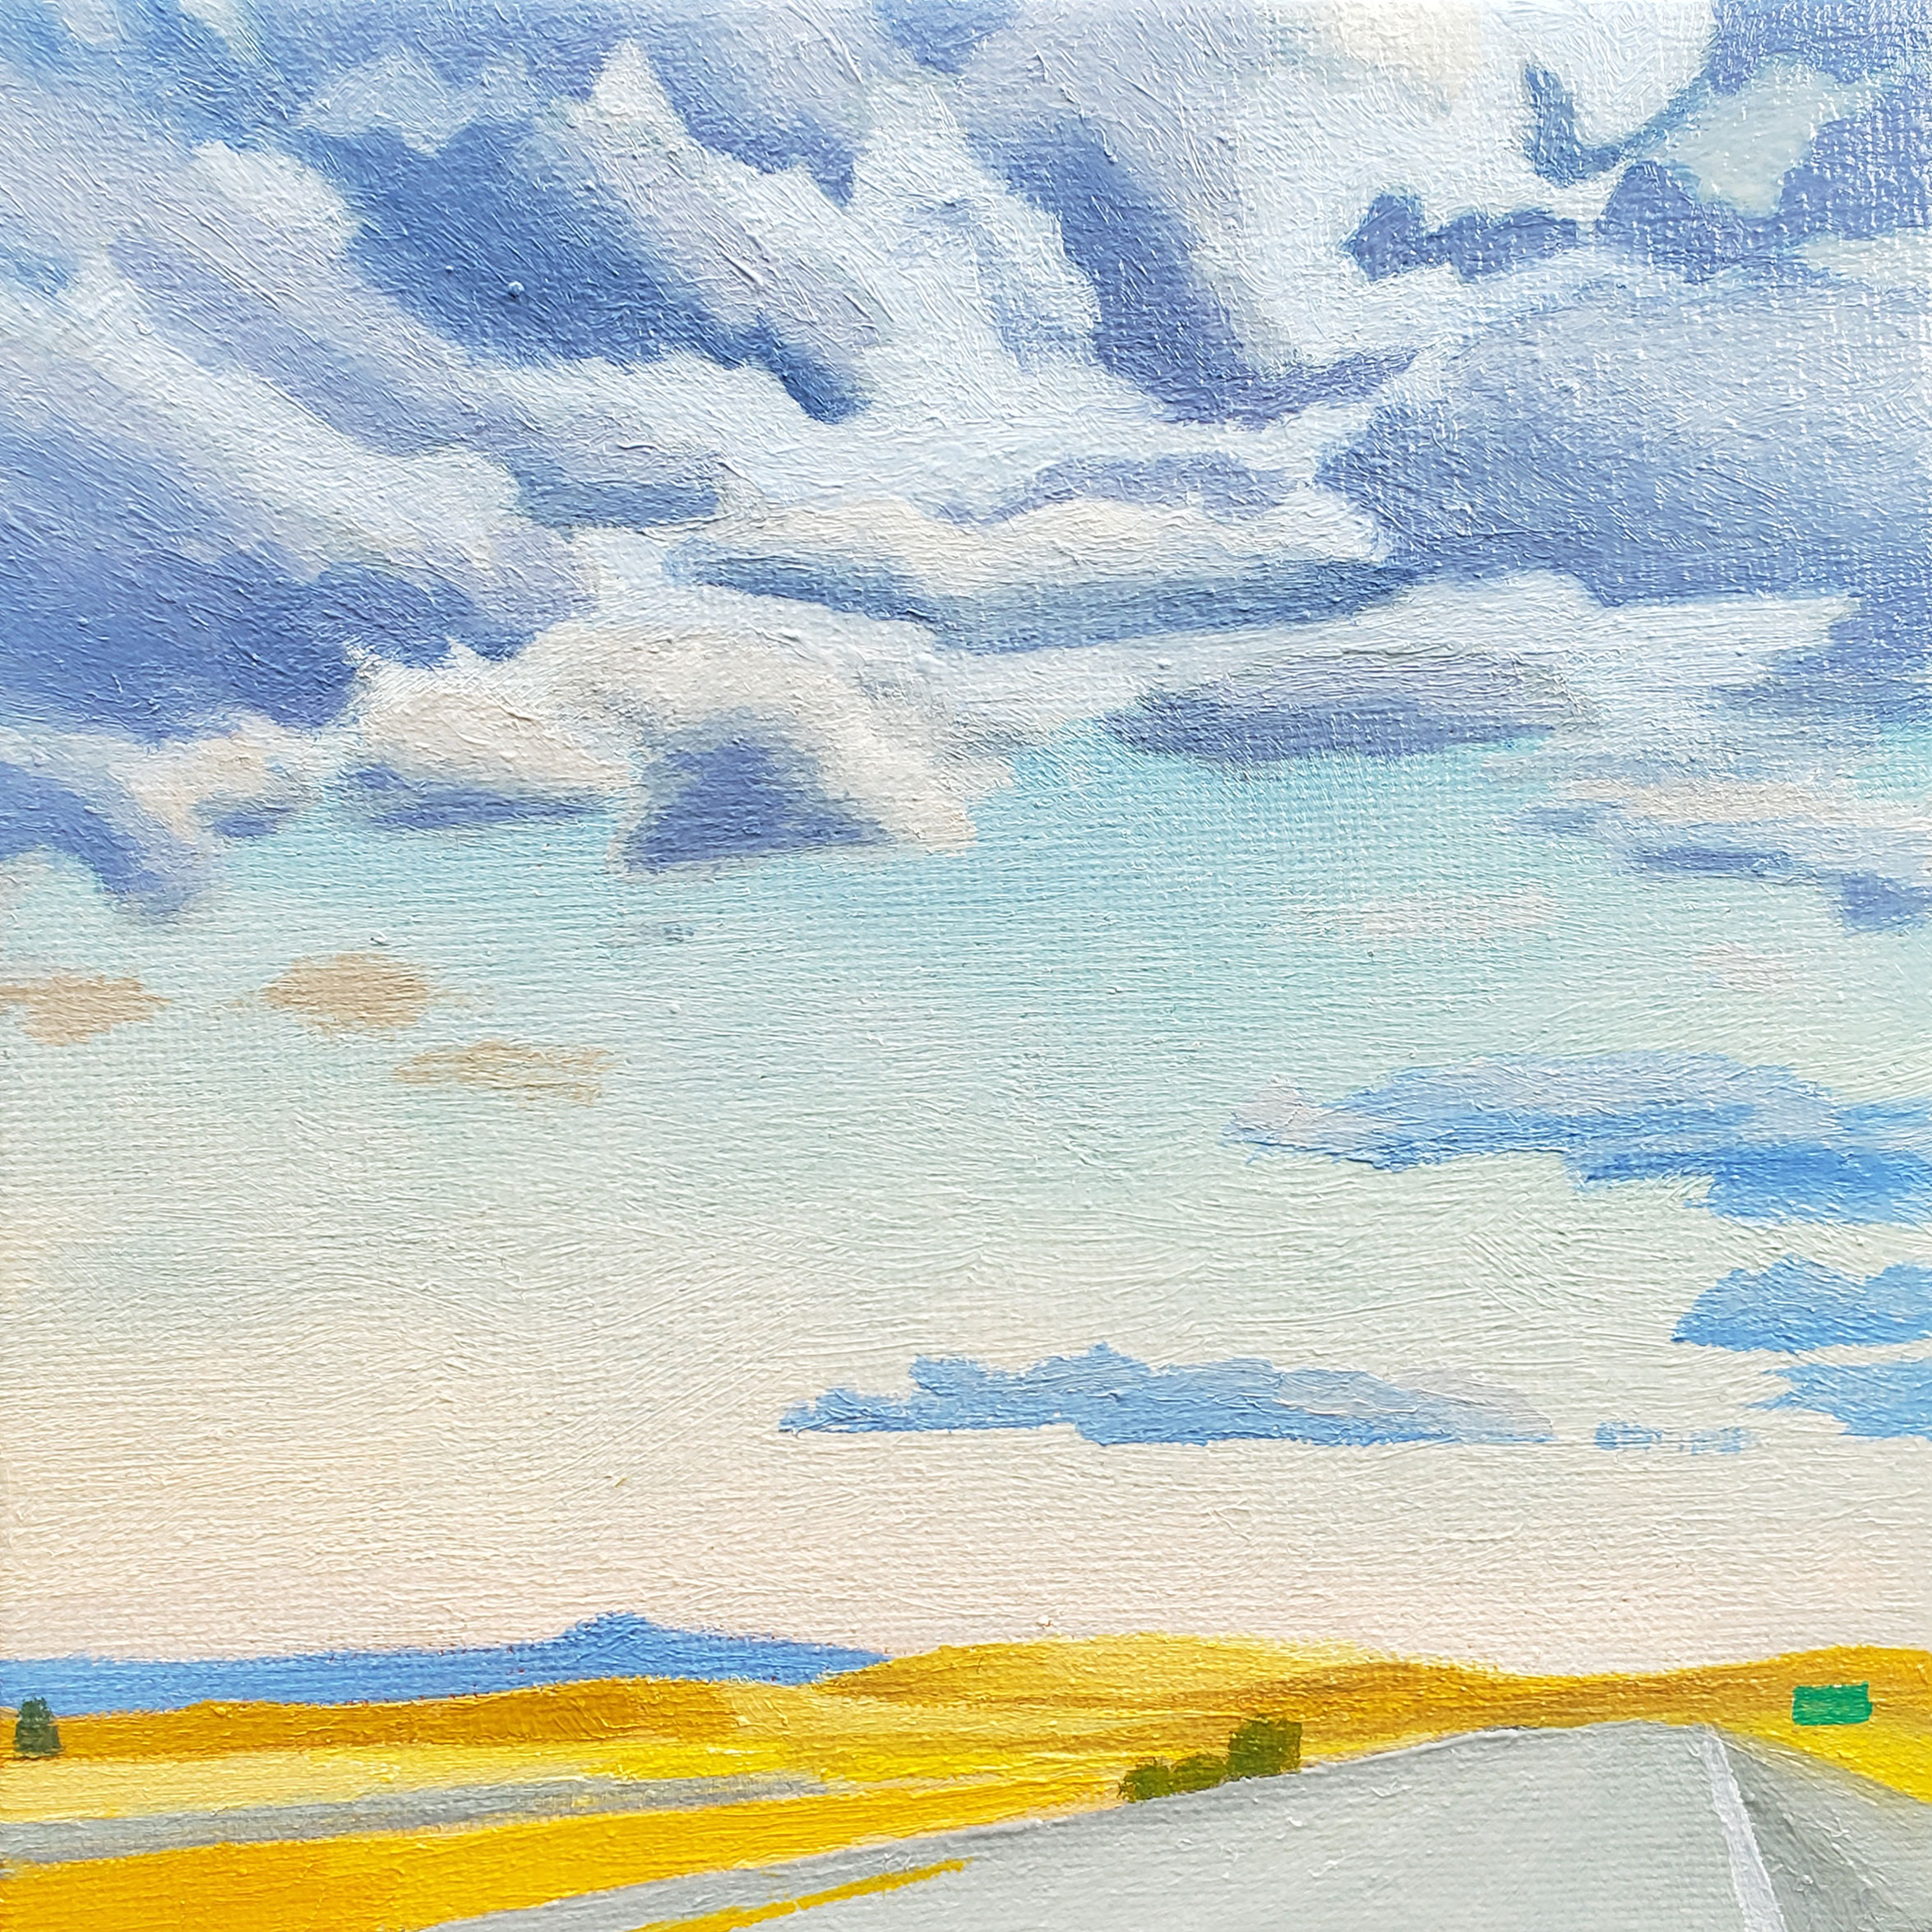 a sky mostly cleared of clouds above a freeway road and straw colored fields